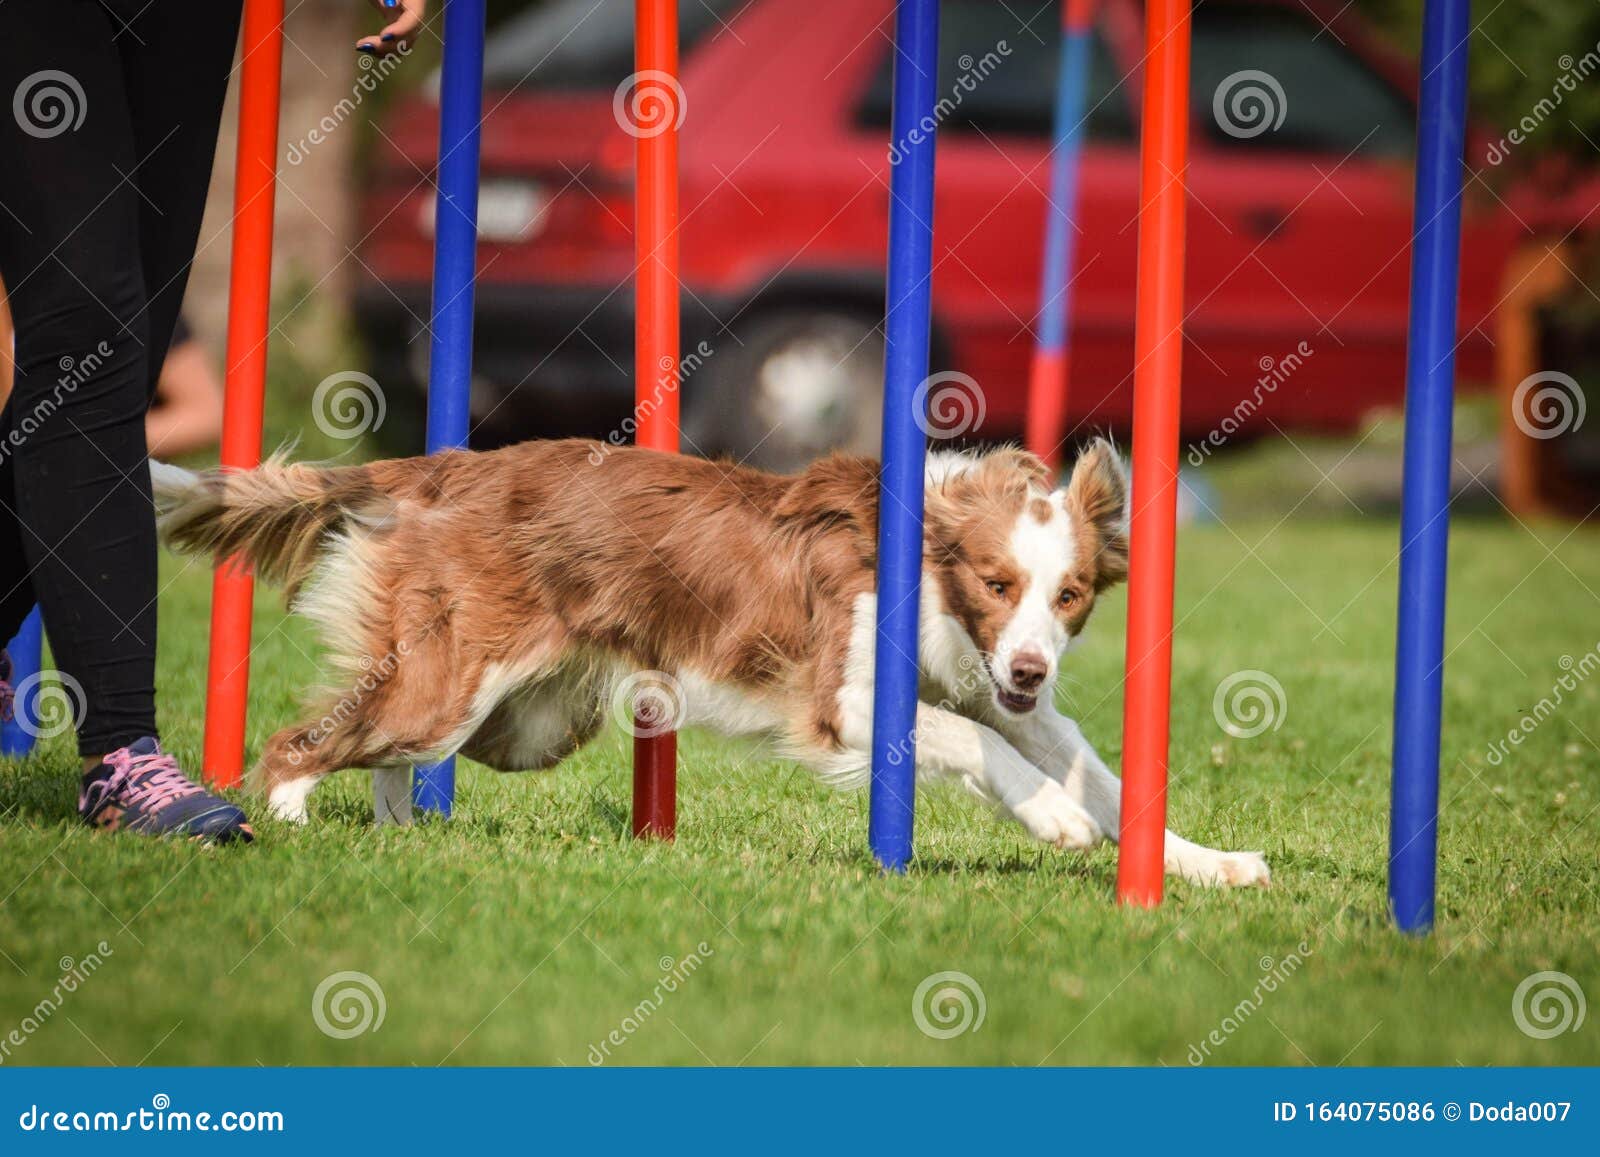 Braun Border Collie Is Running Agility Editorial Photo Image Of Expert Black